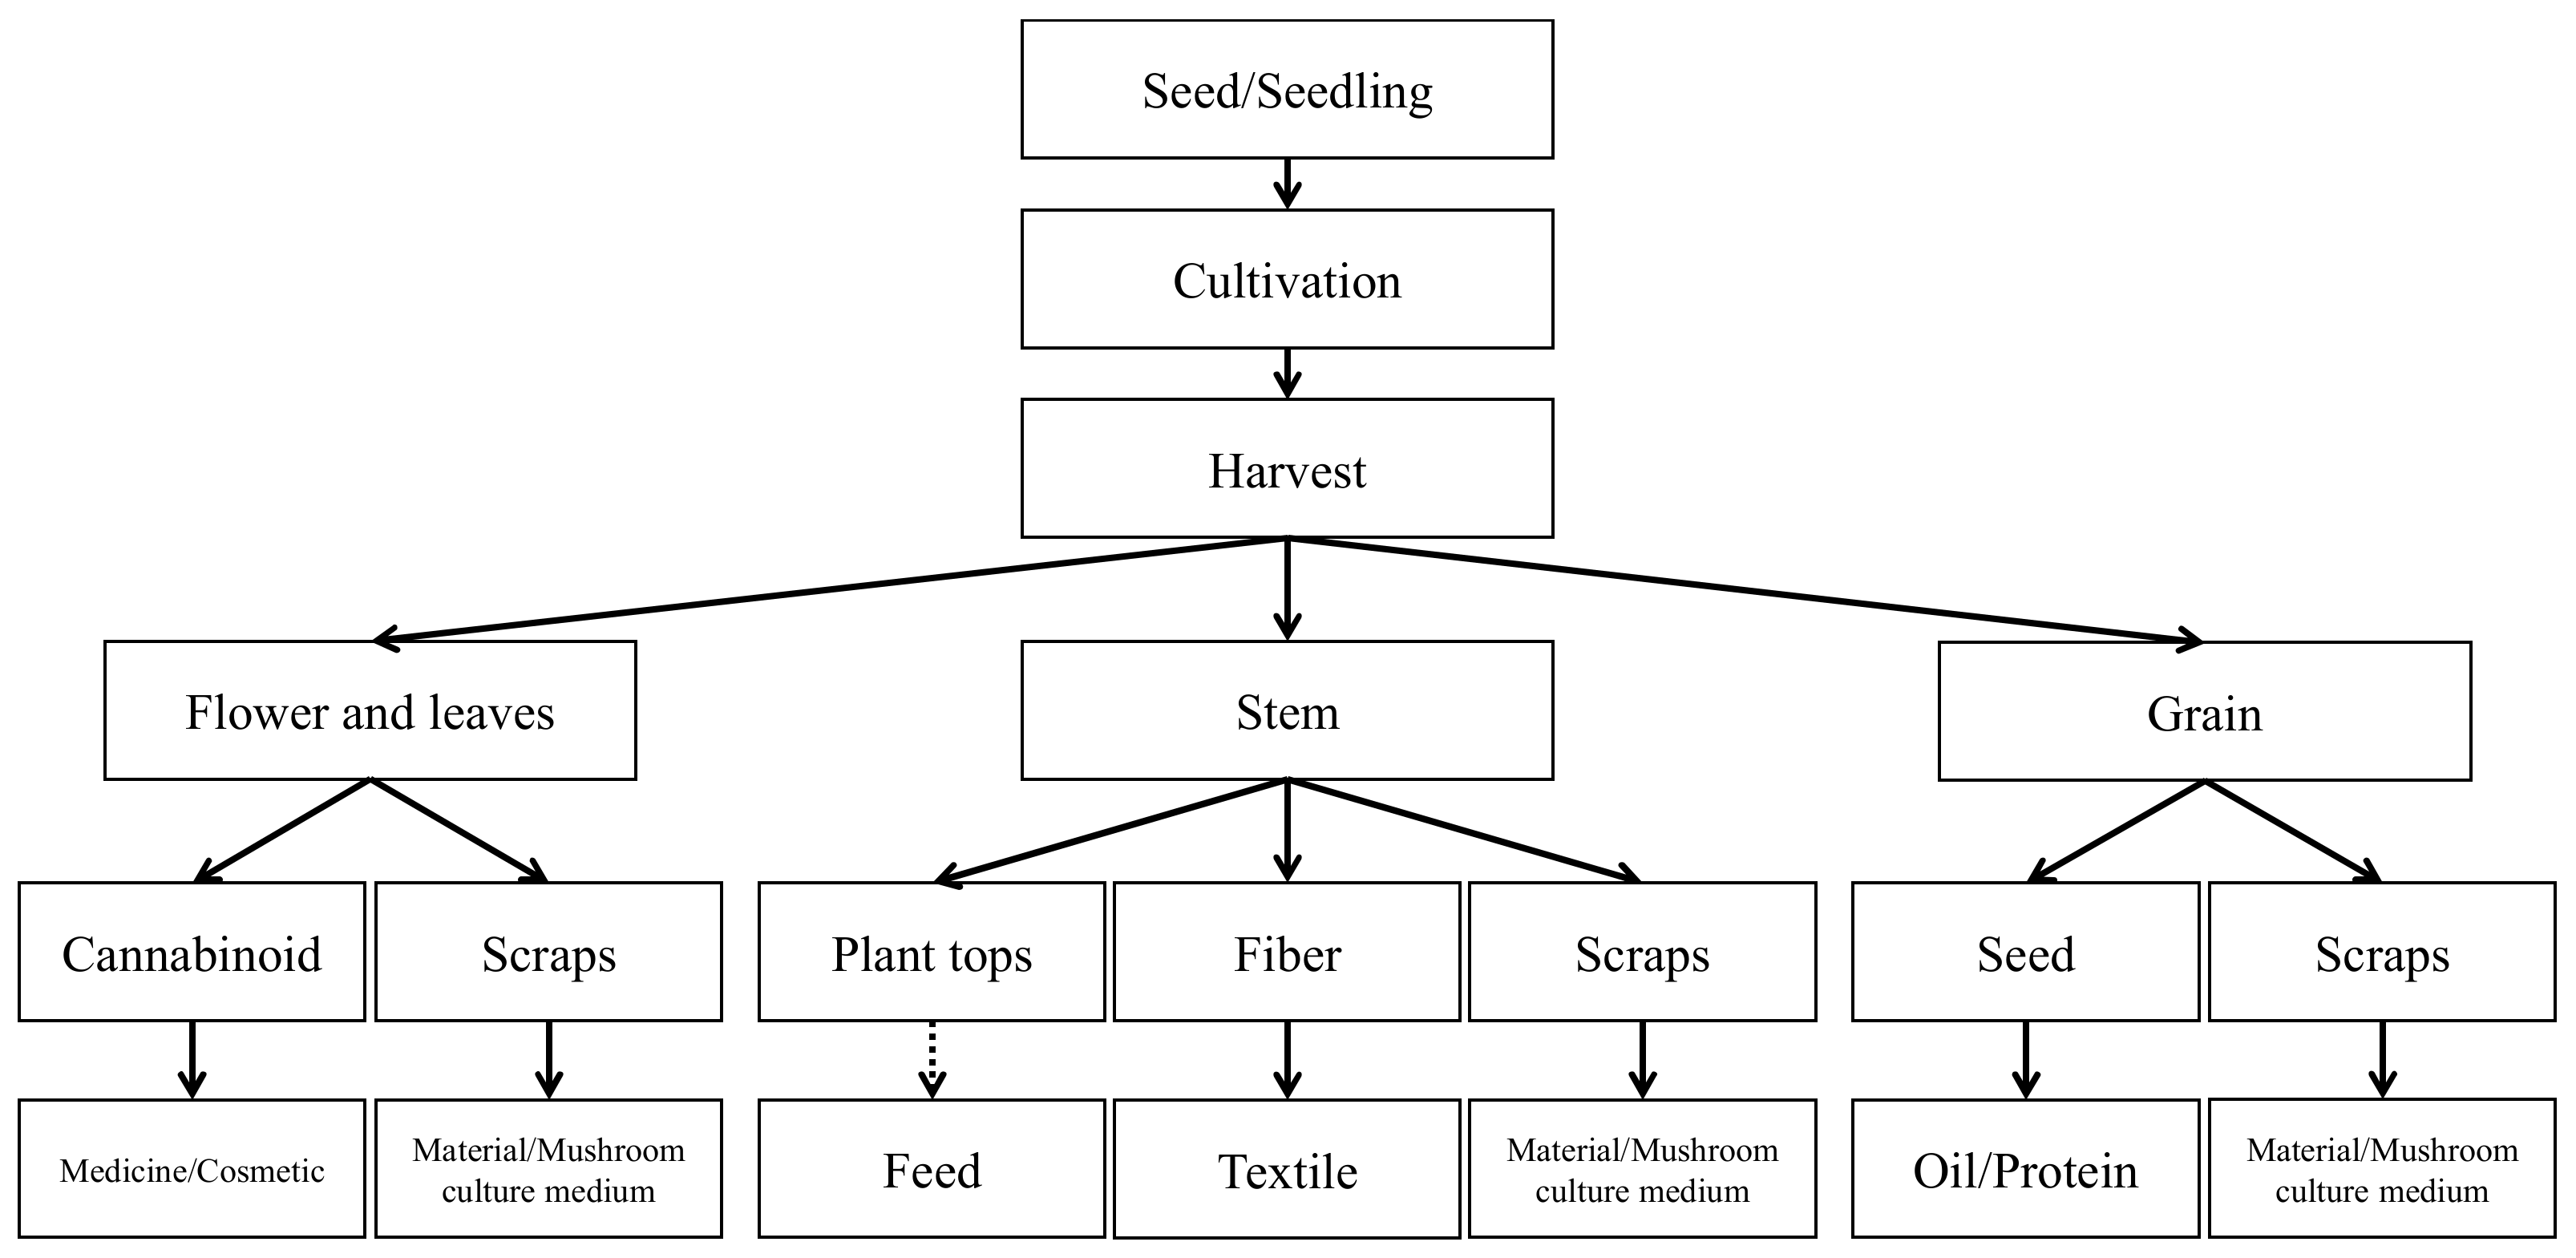 Sustainability | Free Full-Text | Regional Comparison and Strategy  Recommendations of Industrial Hemp in China Based on a SWOT Analysis